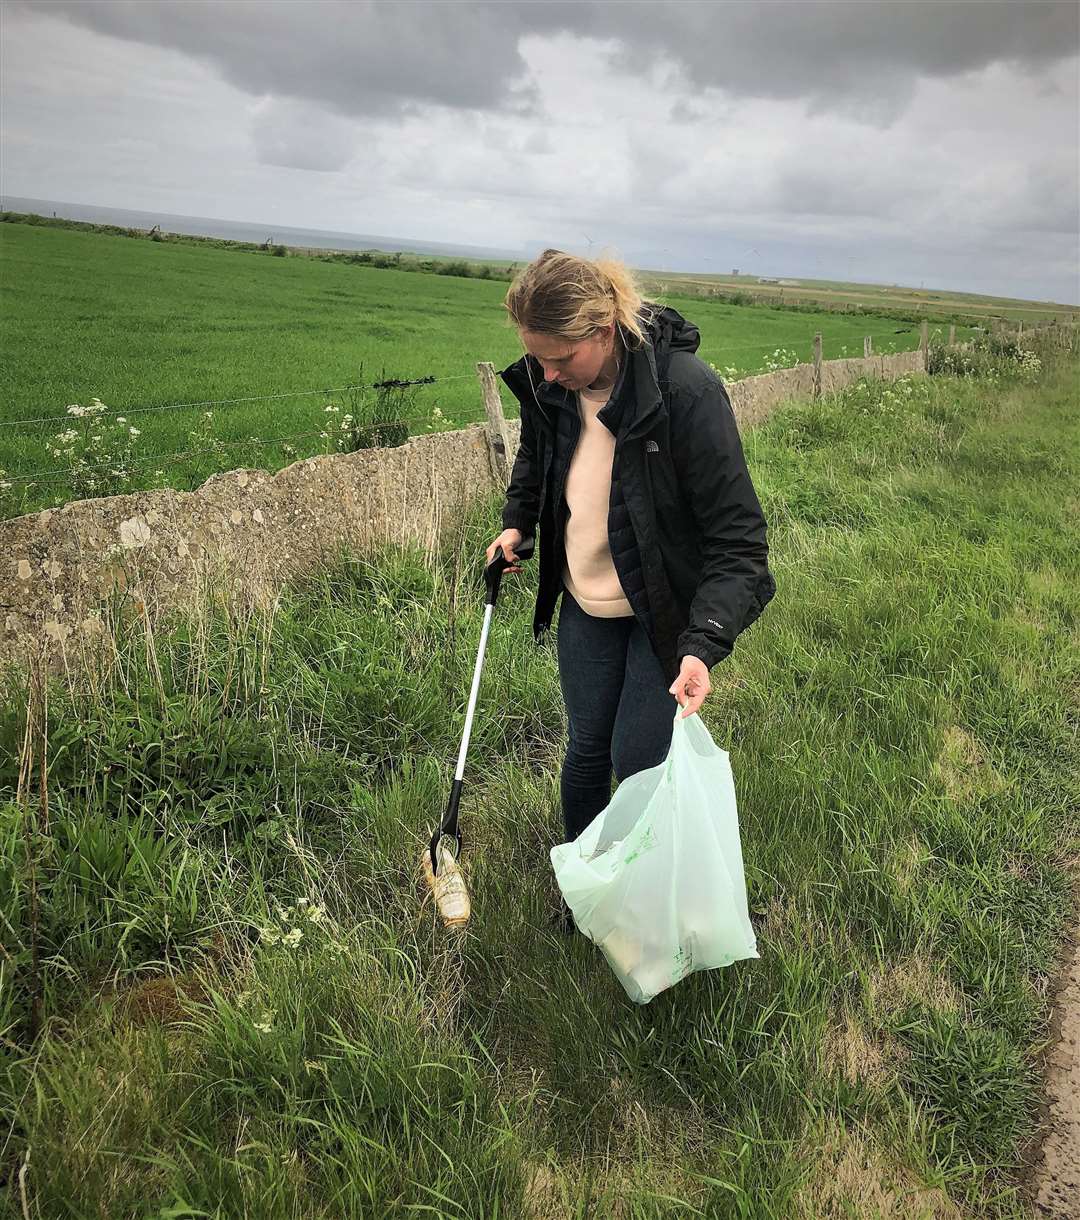 Elinor rubbish picking on road verges in the Dounreay area.